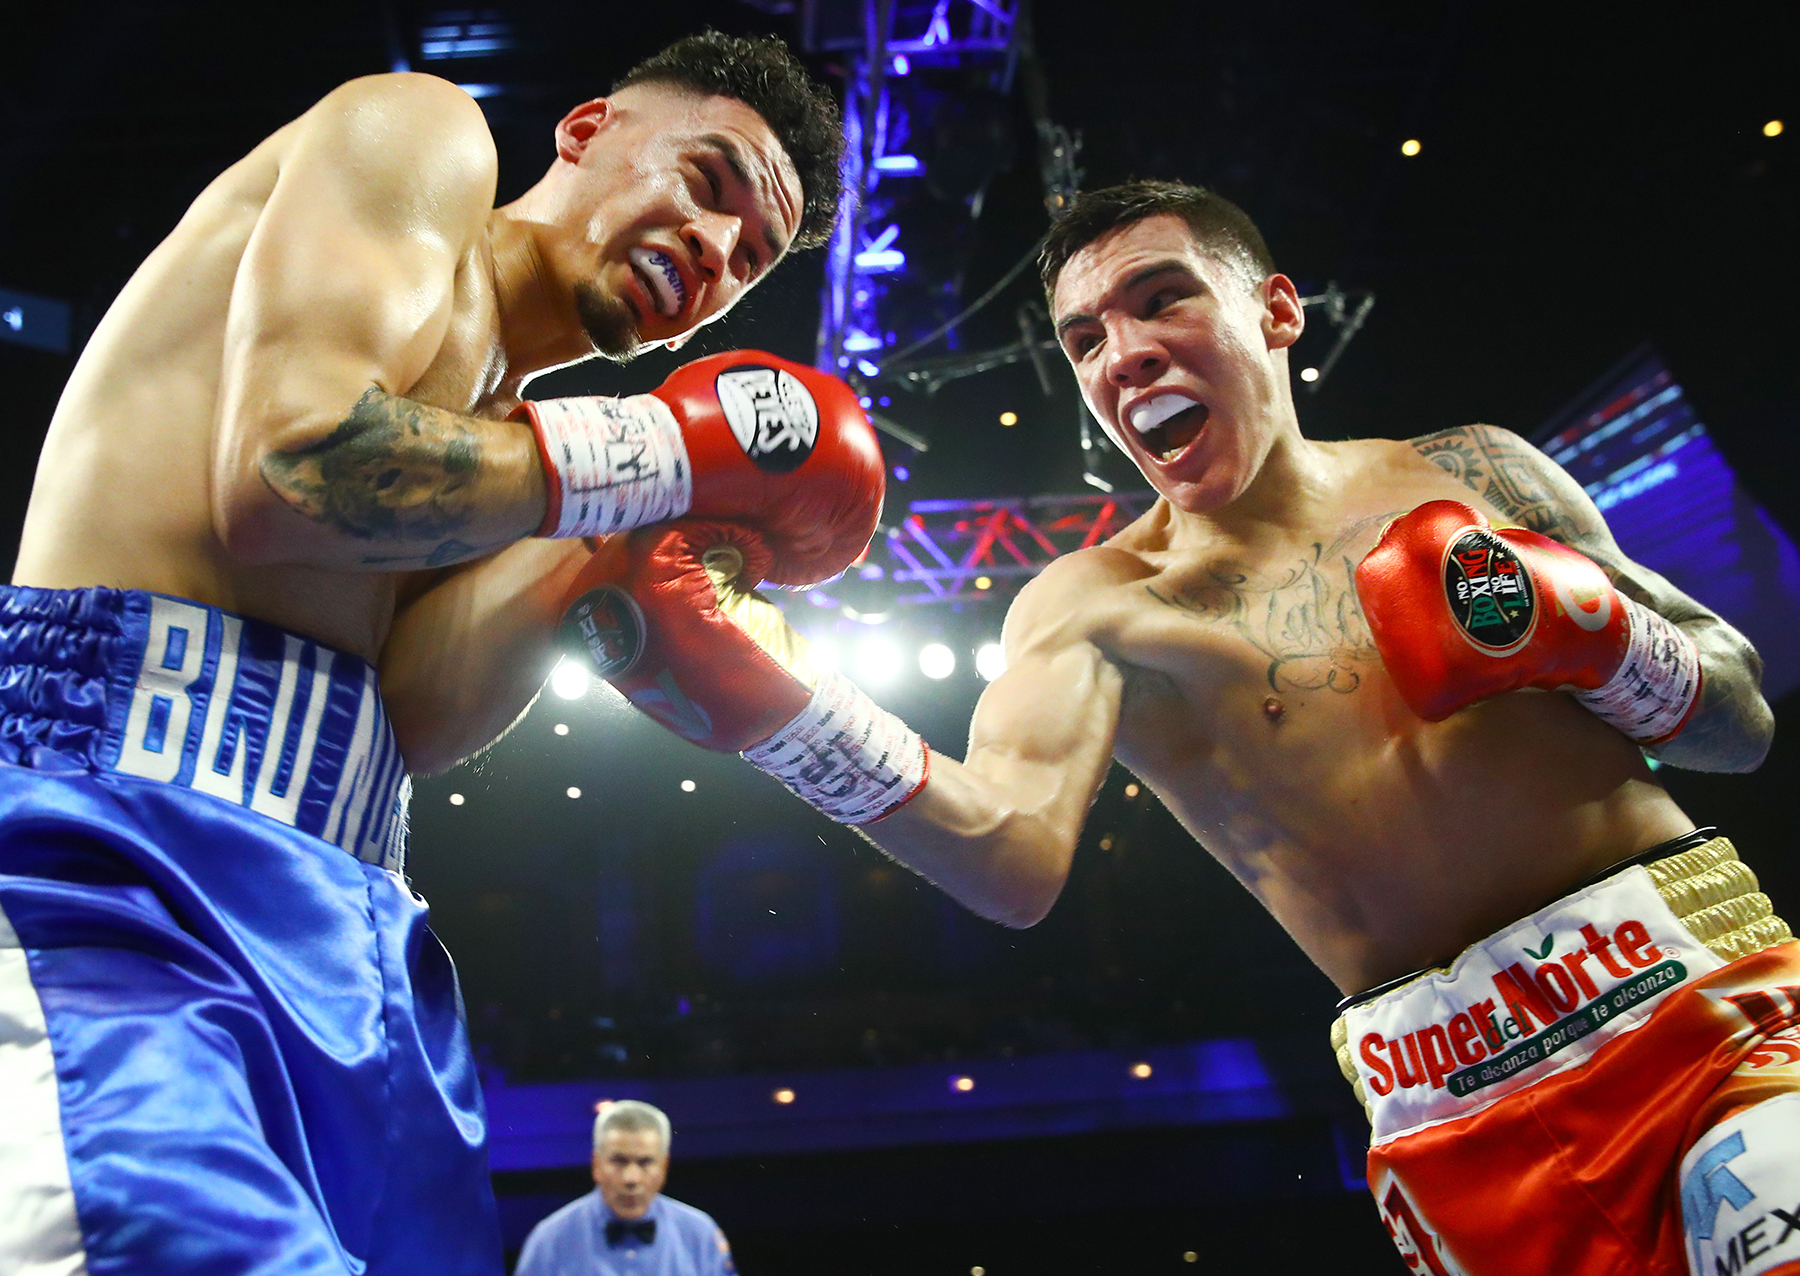 Oscar Valdez: My goal is to try to conquer what belongs to me, I will be champion again